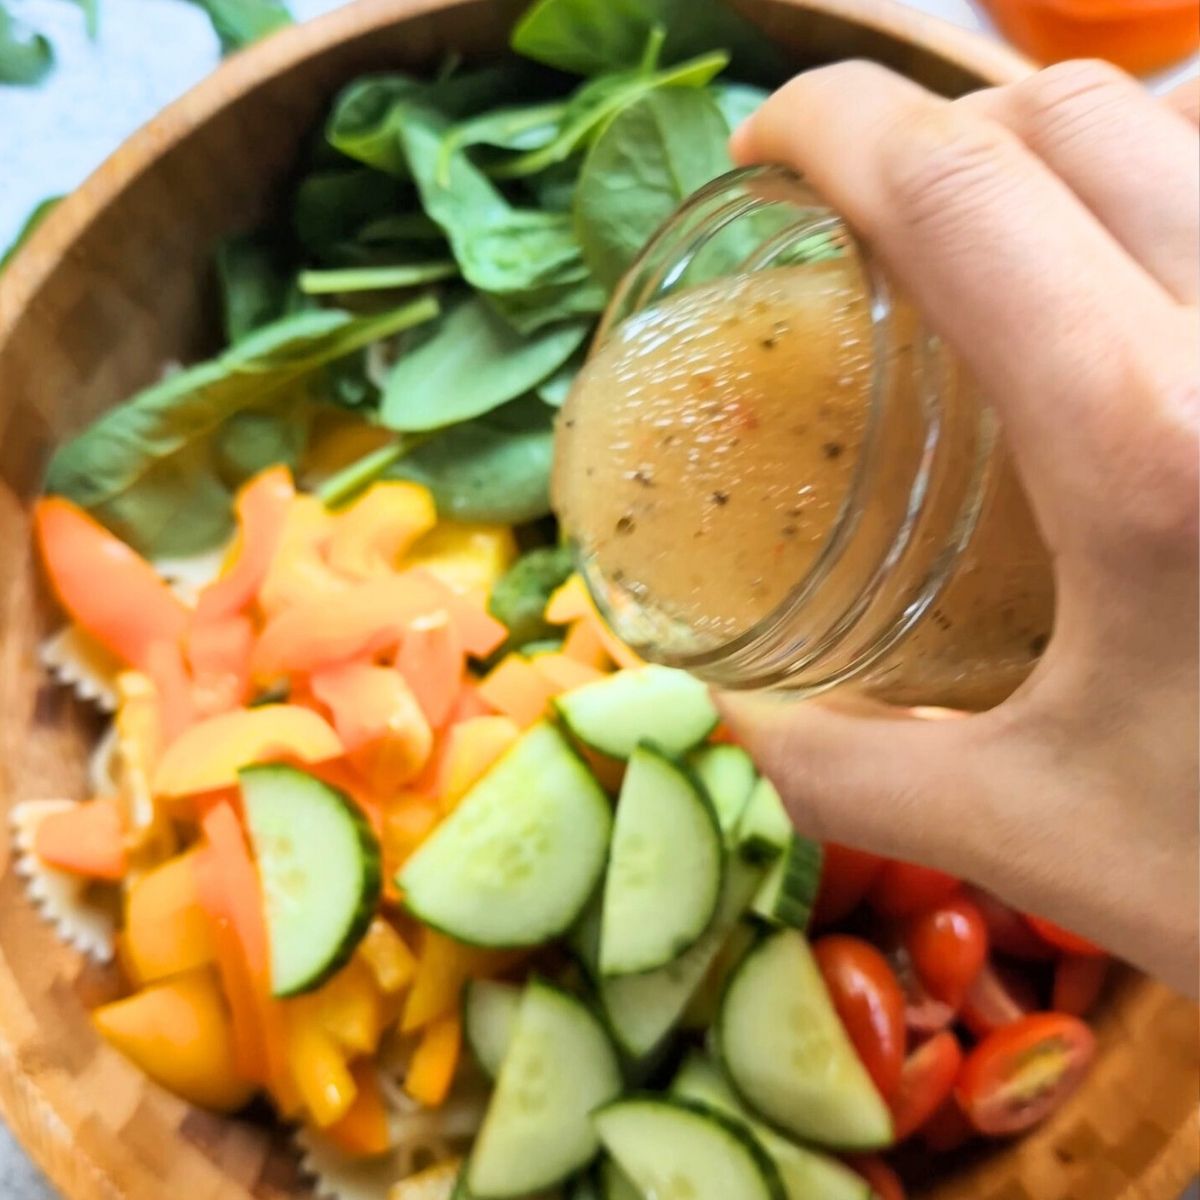 Italian dressing being poured over a large salad with chopped vegetables and farfalle pasta.